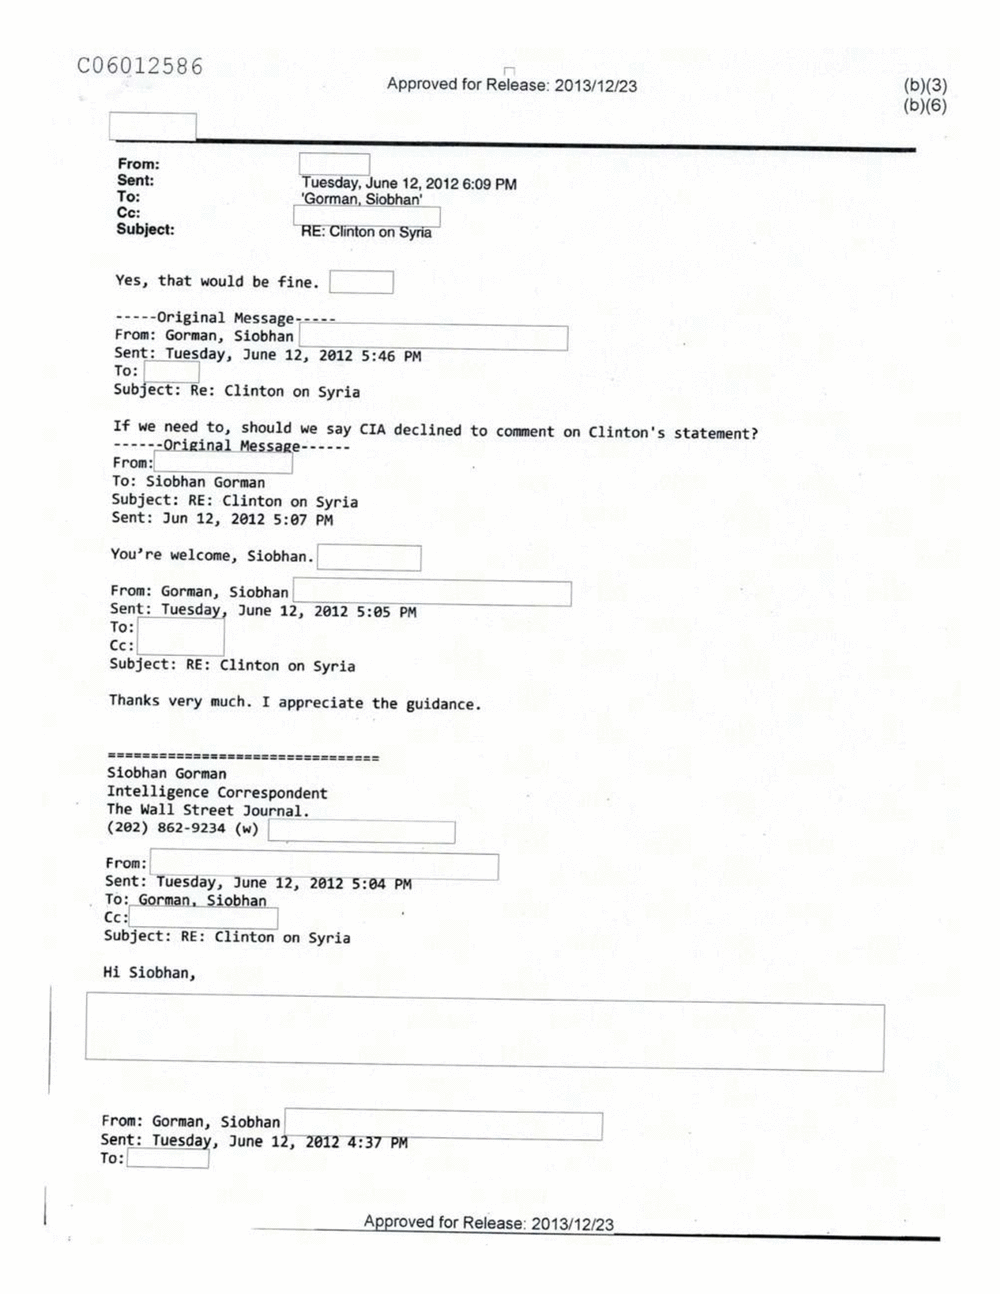 Page 131 from Email Correspondence Between Reporters and CIA Flacks